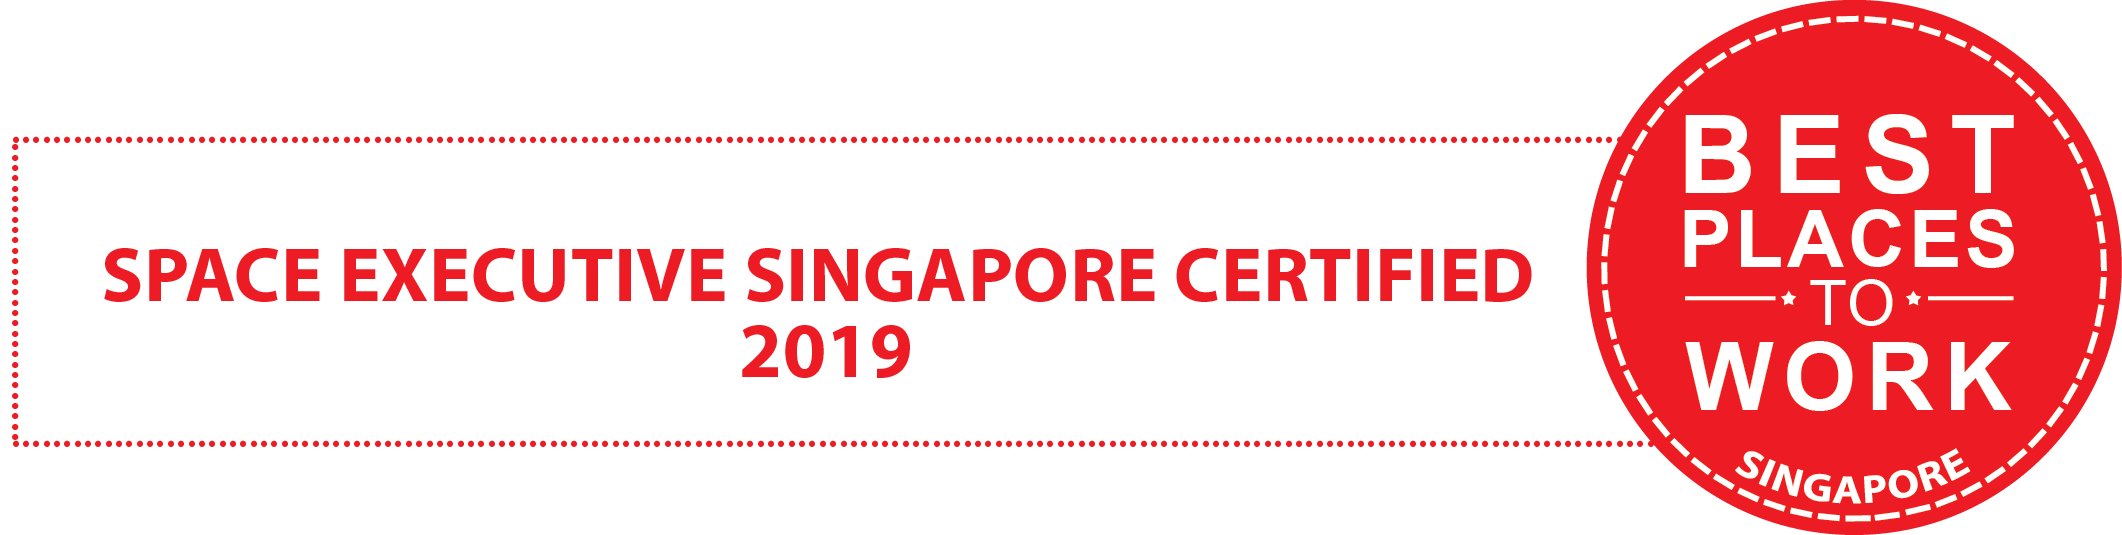 best places to work 2019 singapore award